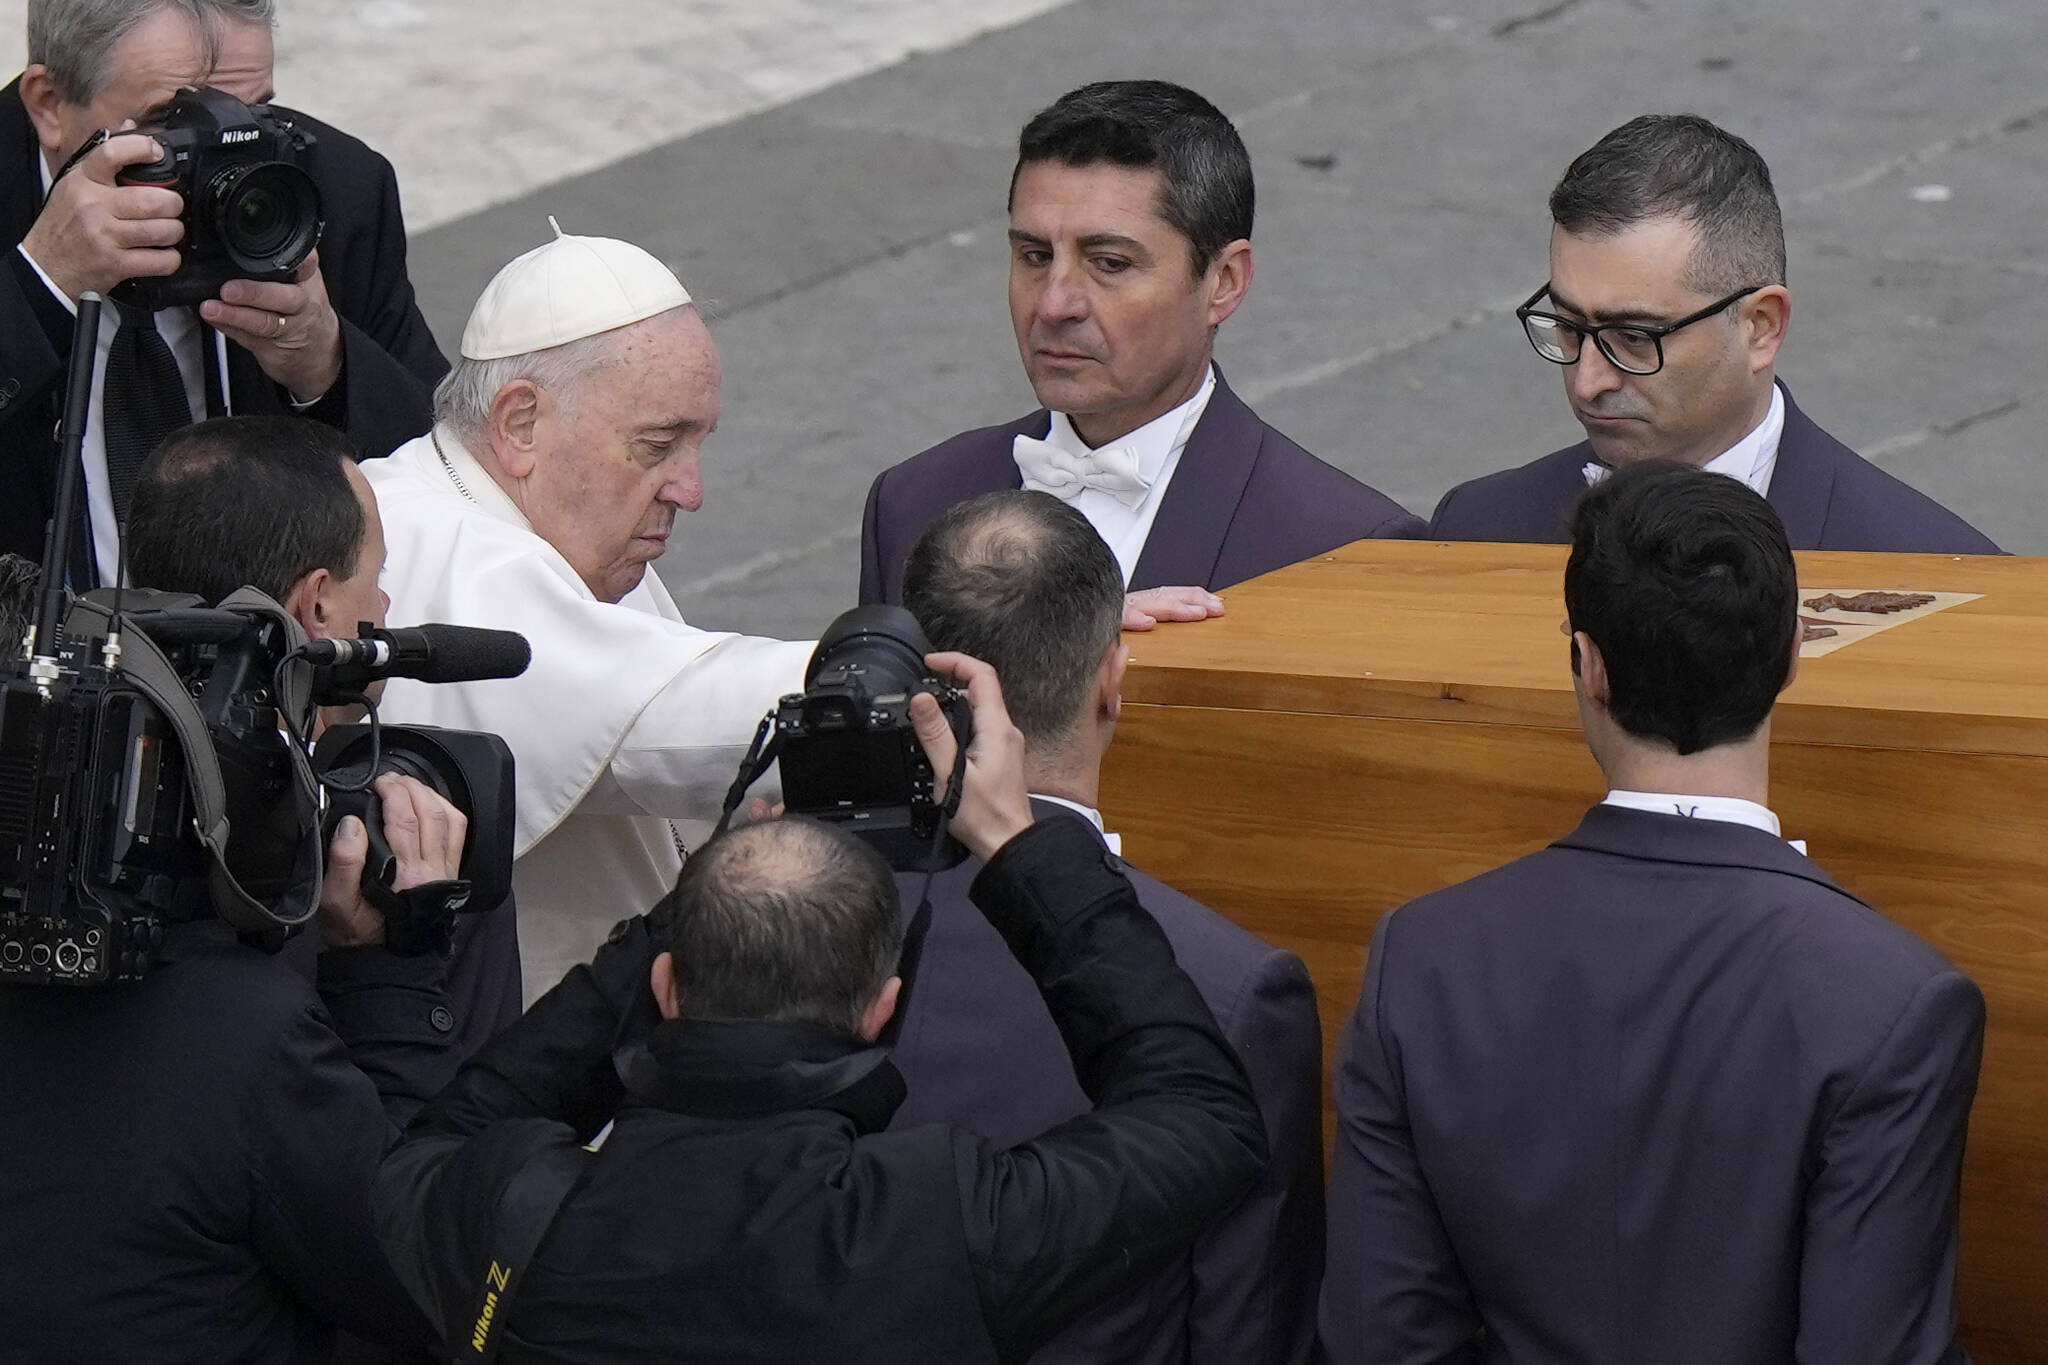 Pope Francis touches the coffin of late Pope Emeritus Benedict XVI before it is carried away after a funeral mass in St. Peter’s Square at the Vatican, Thursday, Jan. 5, 2023. Benedict died at 95 on Dec. 31 in the monastery on the Vatican grounds where he had spent nearly all of his decade in retirement. (AP Photo/Ben Curtis)